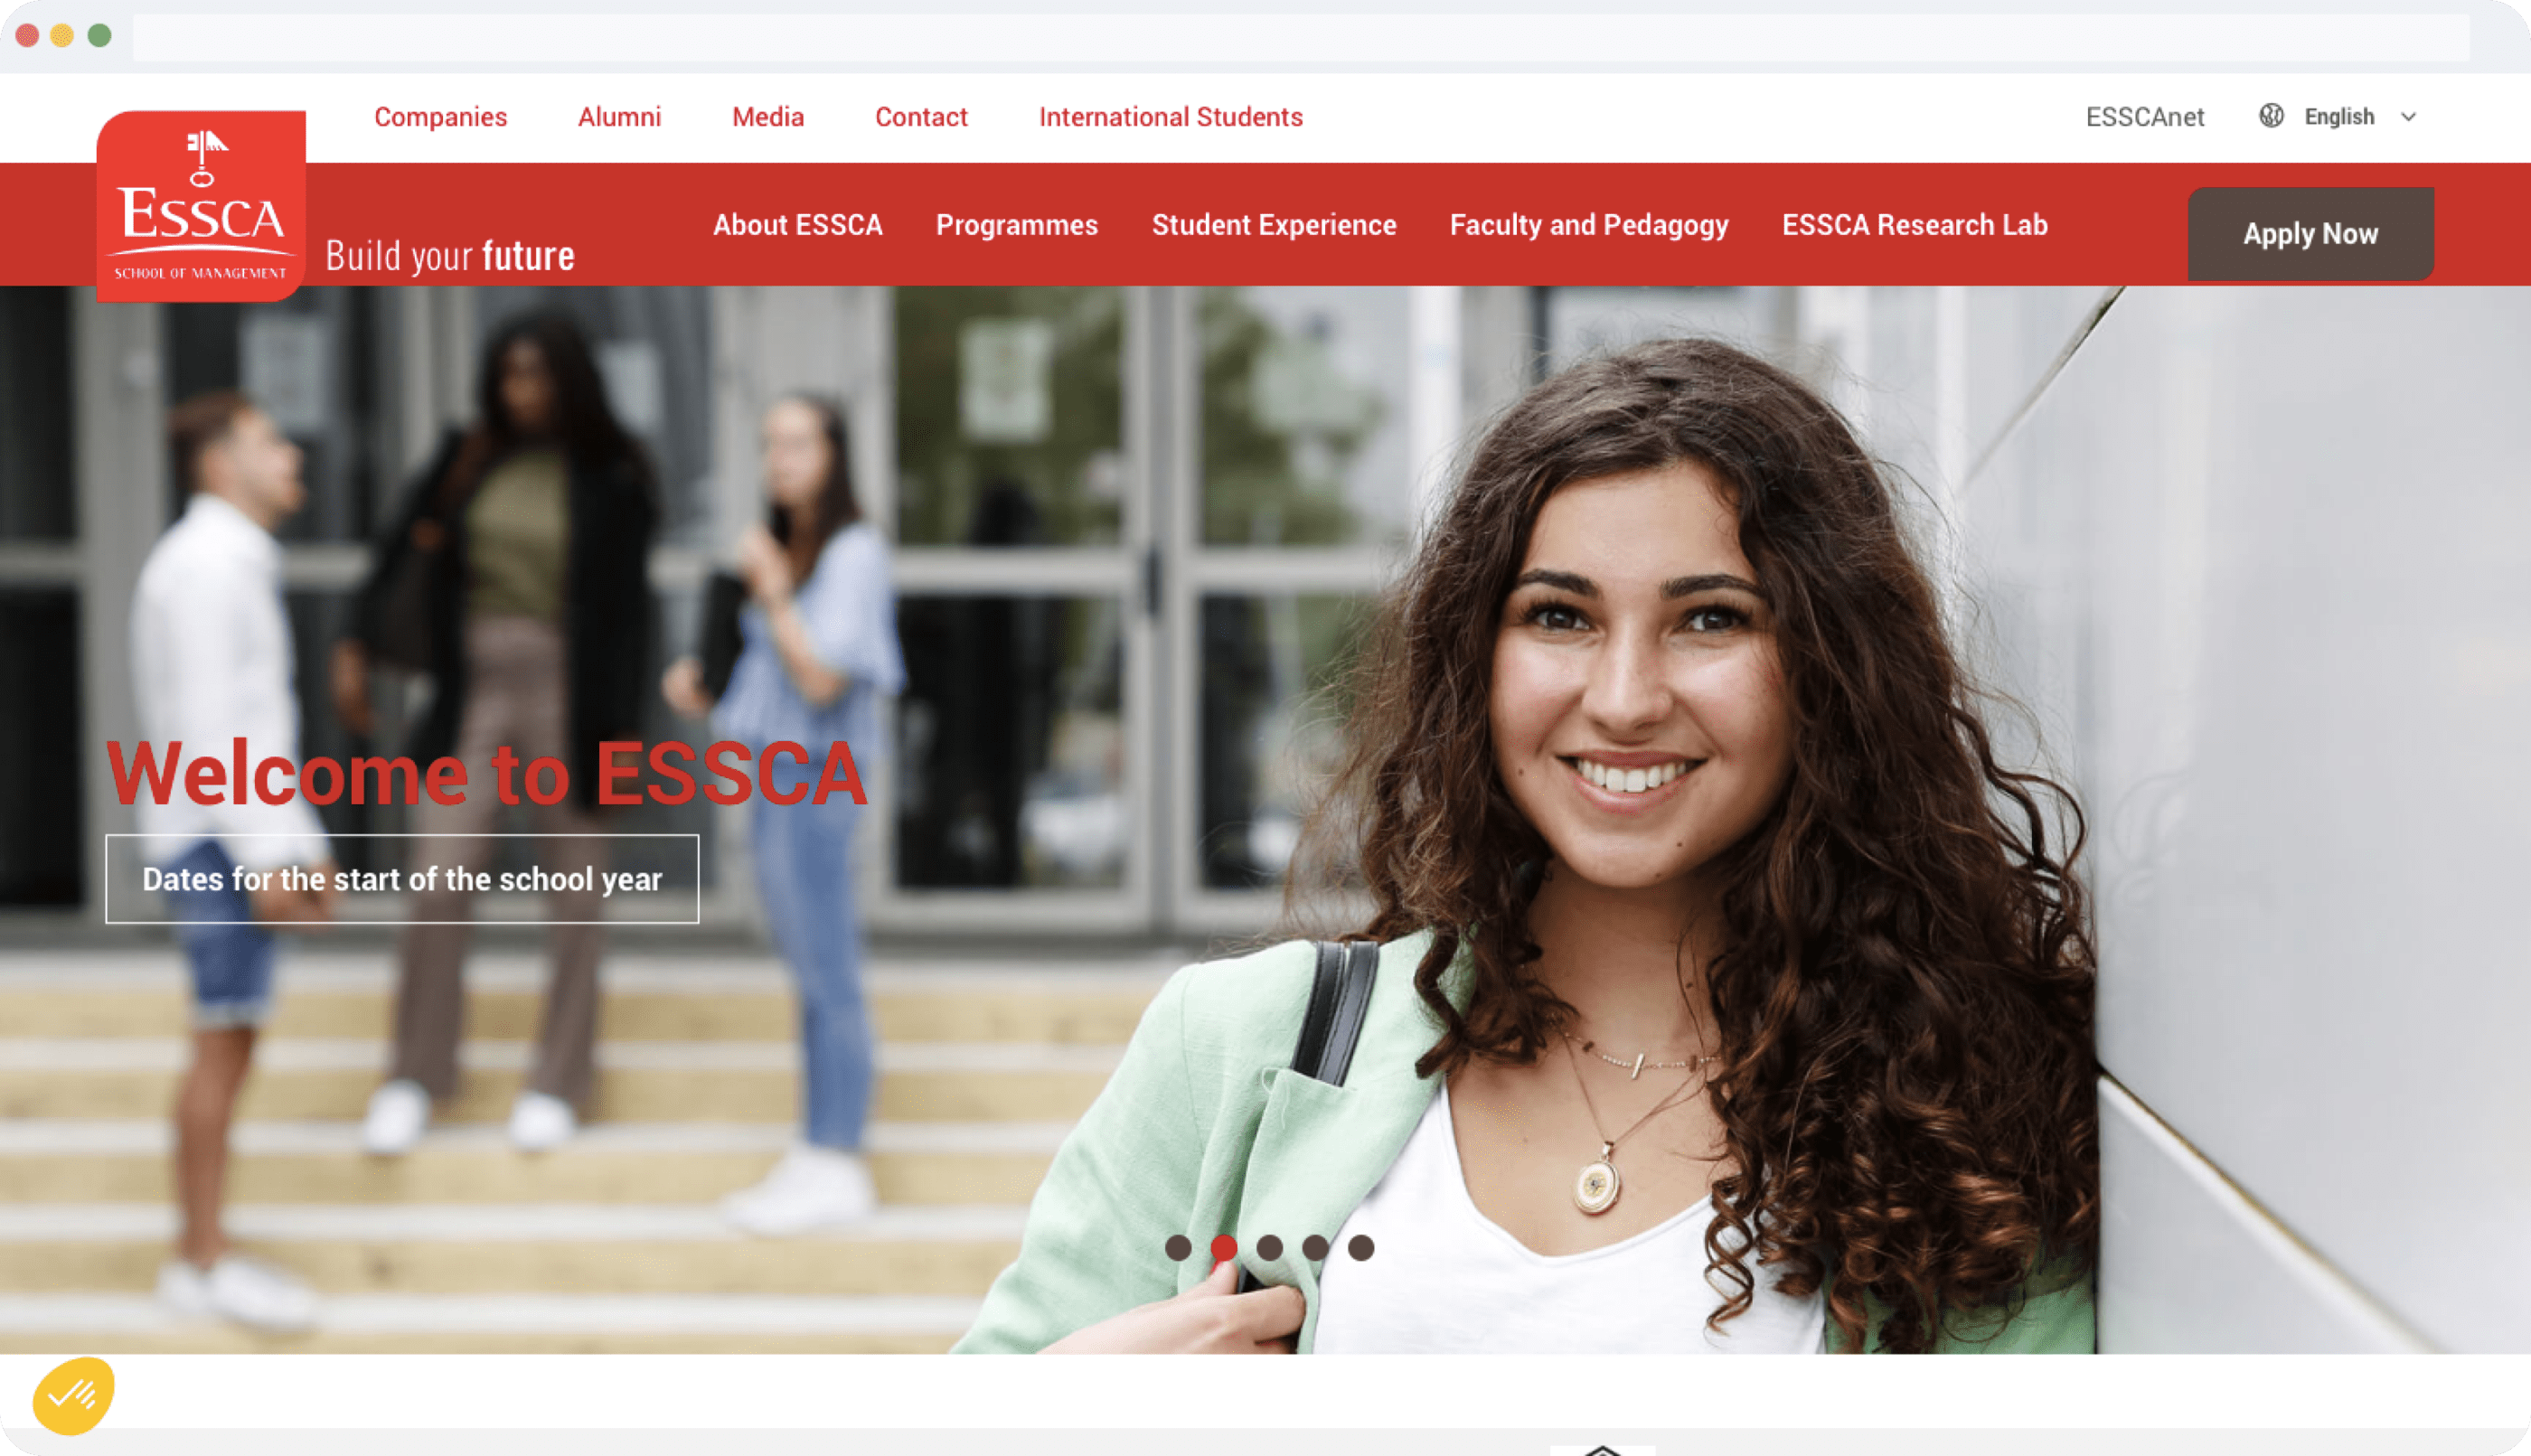 The current Homepage of the revamped ESSCA website